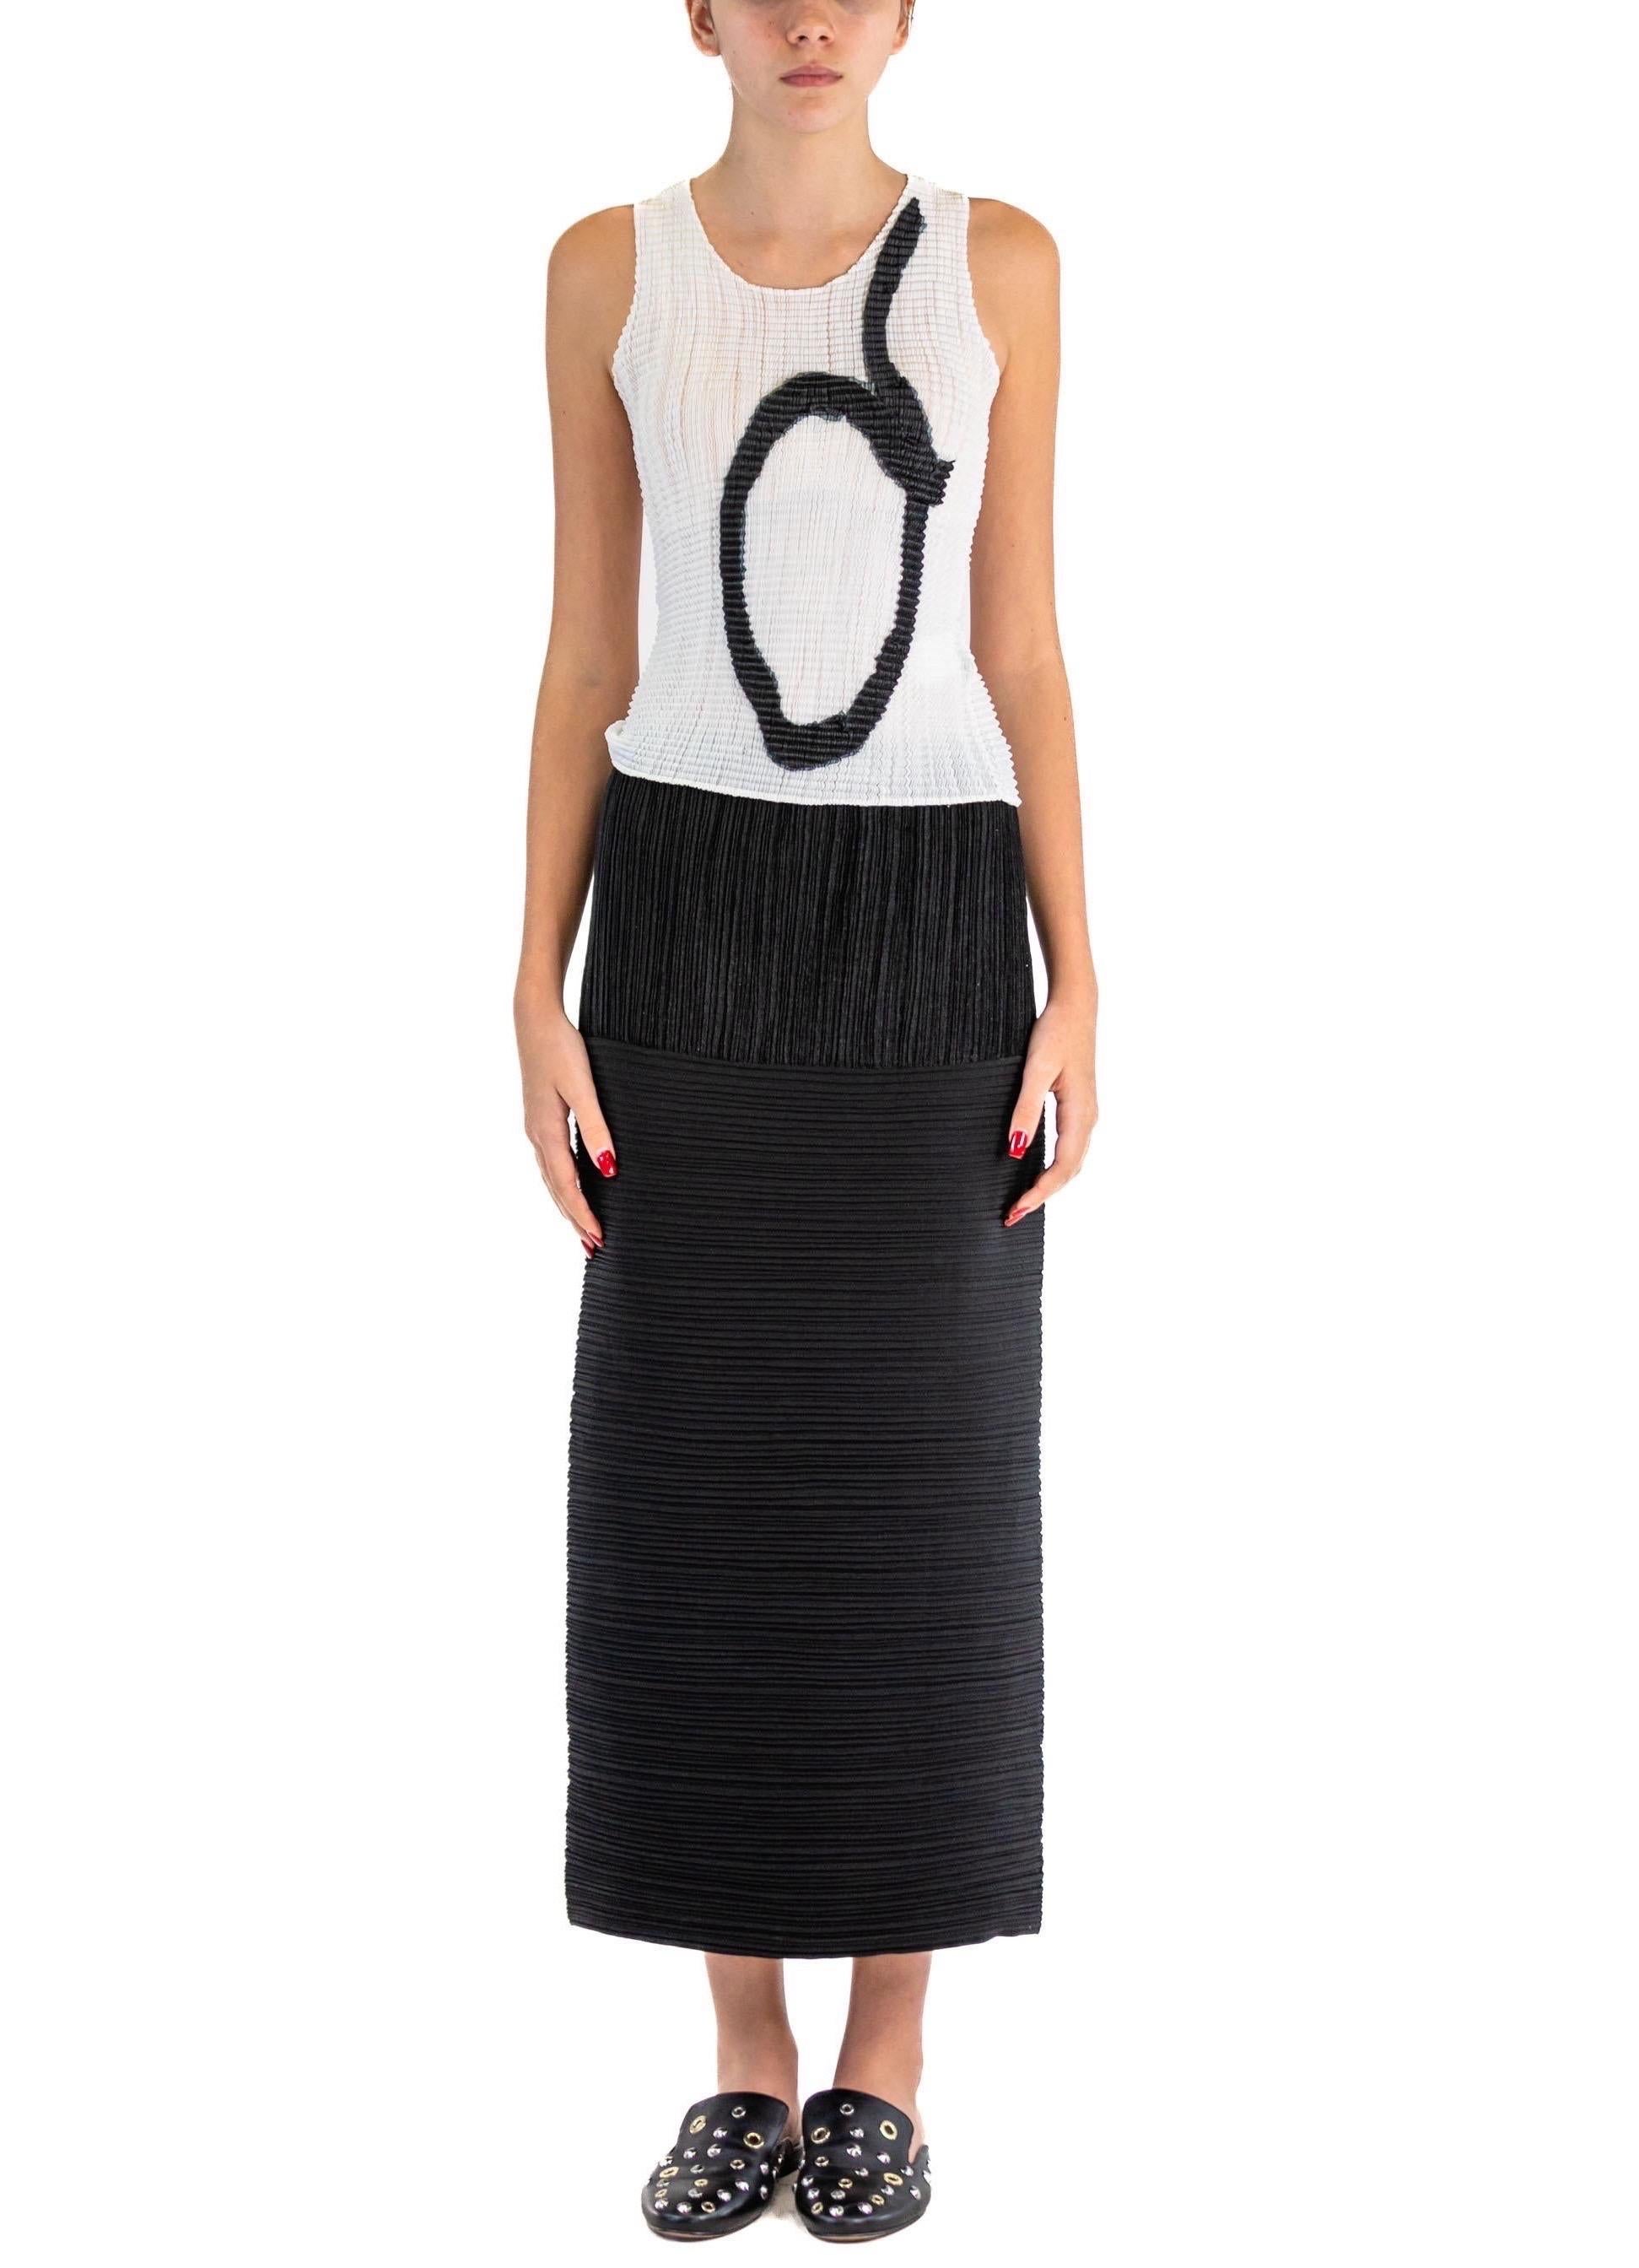 2000S ISSEY MIYAKE Black & White Polyester Double Pleated Tank Top Velvet Skirt Ensemble With Appliqué Shapes